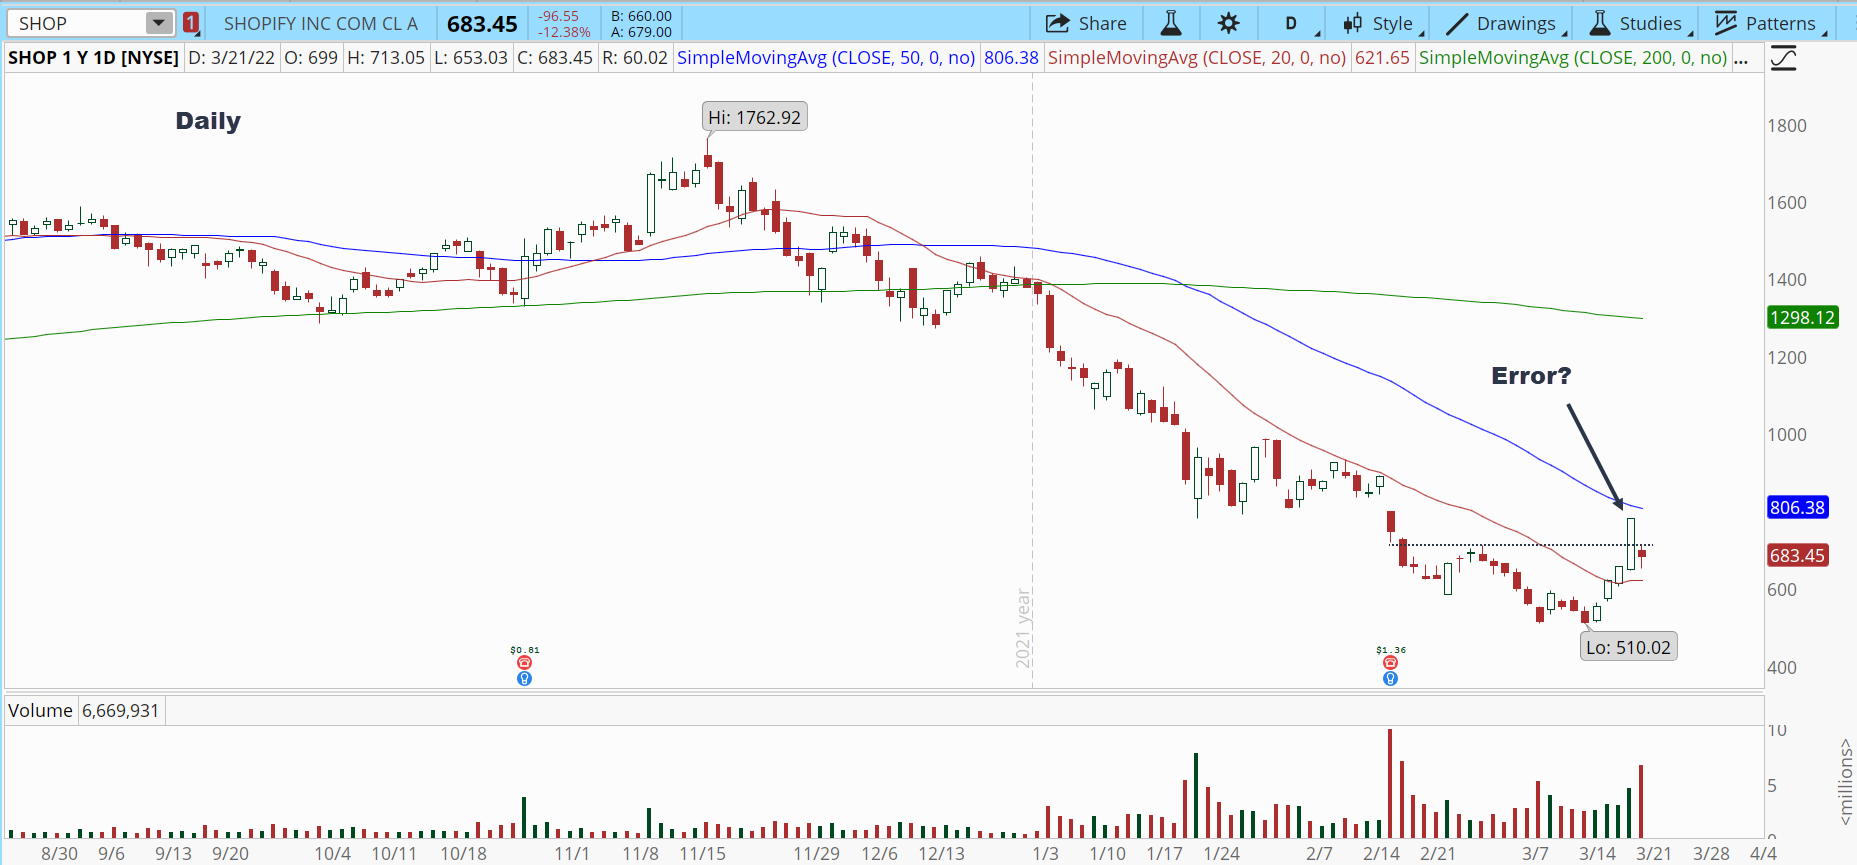 Shopify (SHOP) stock daily chart showing fakeout.